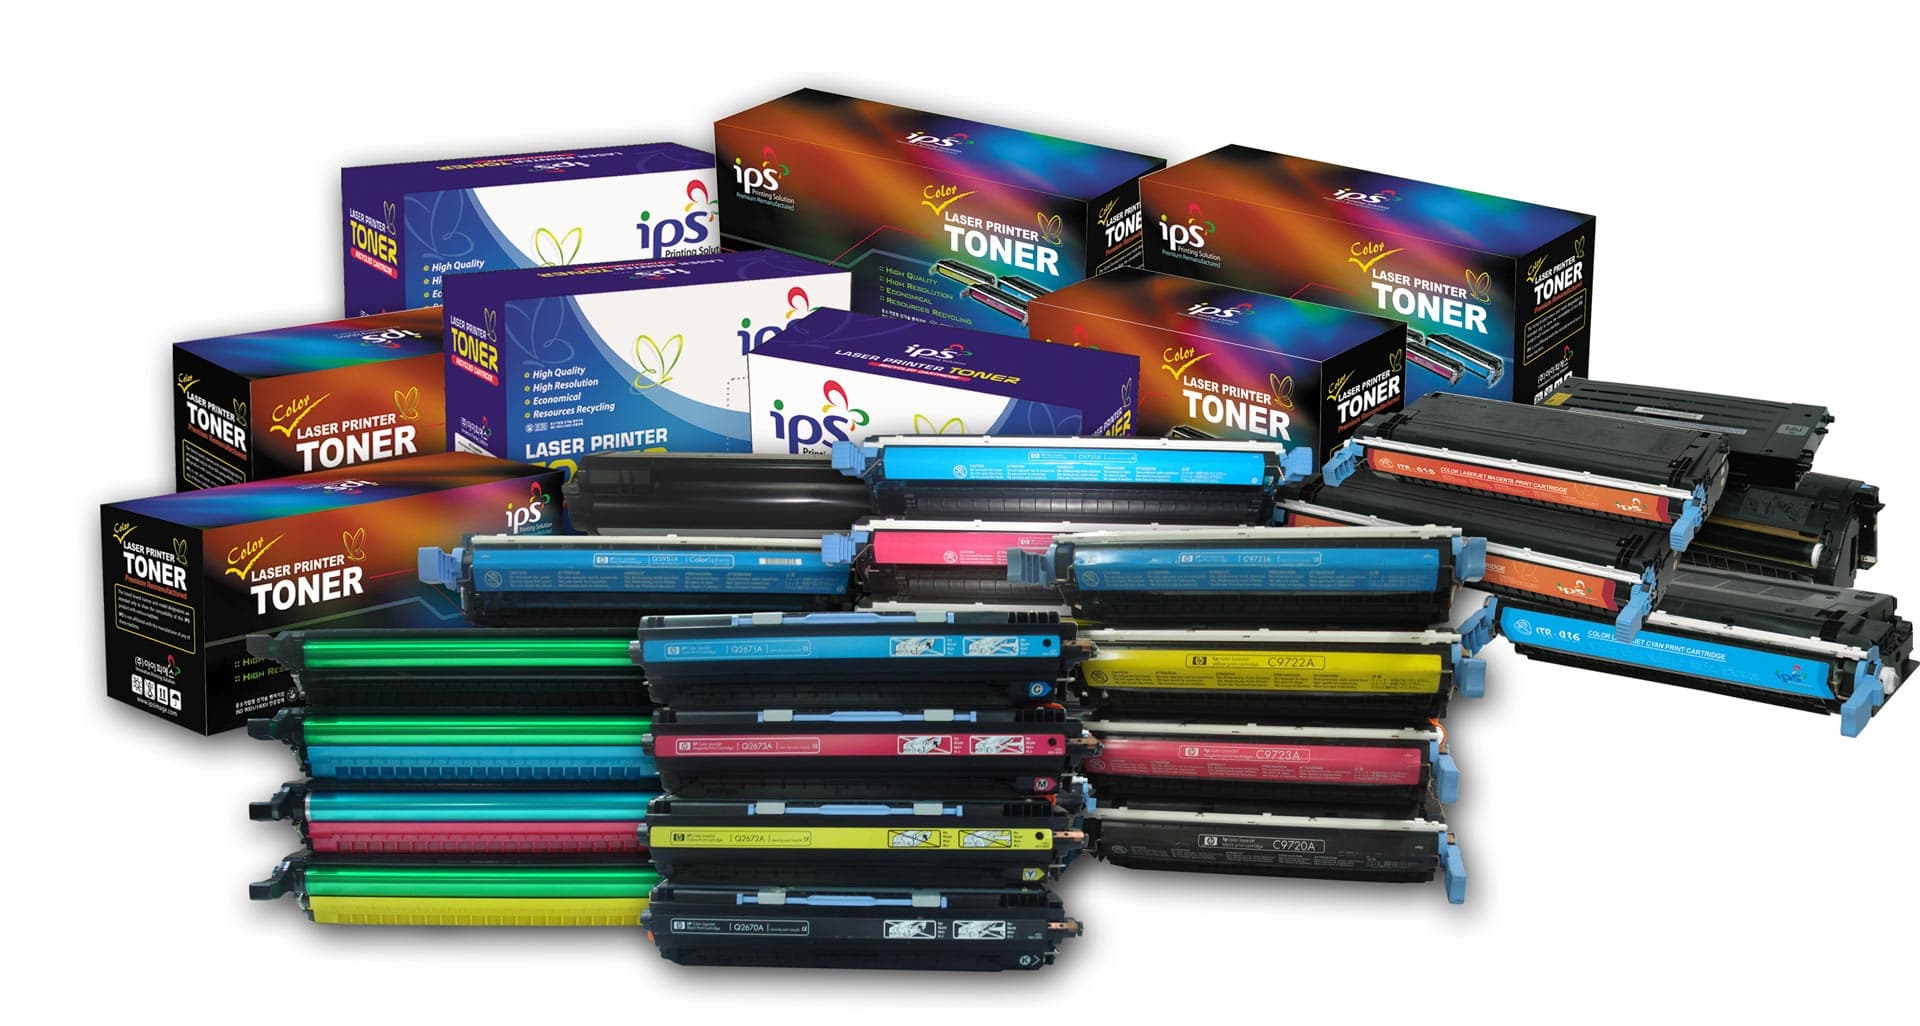 Compatible Color Toner Cartridges made by IPS in Korea